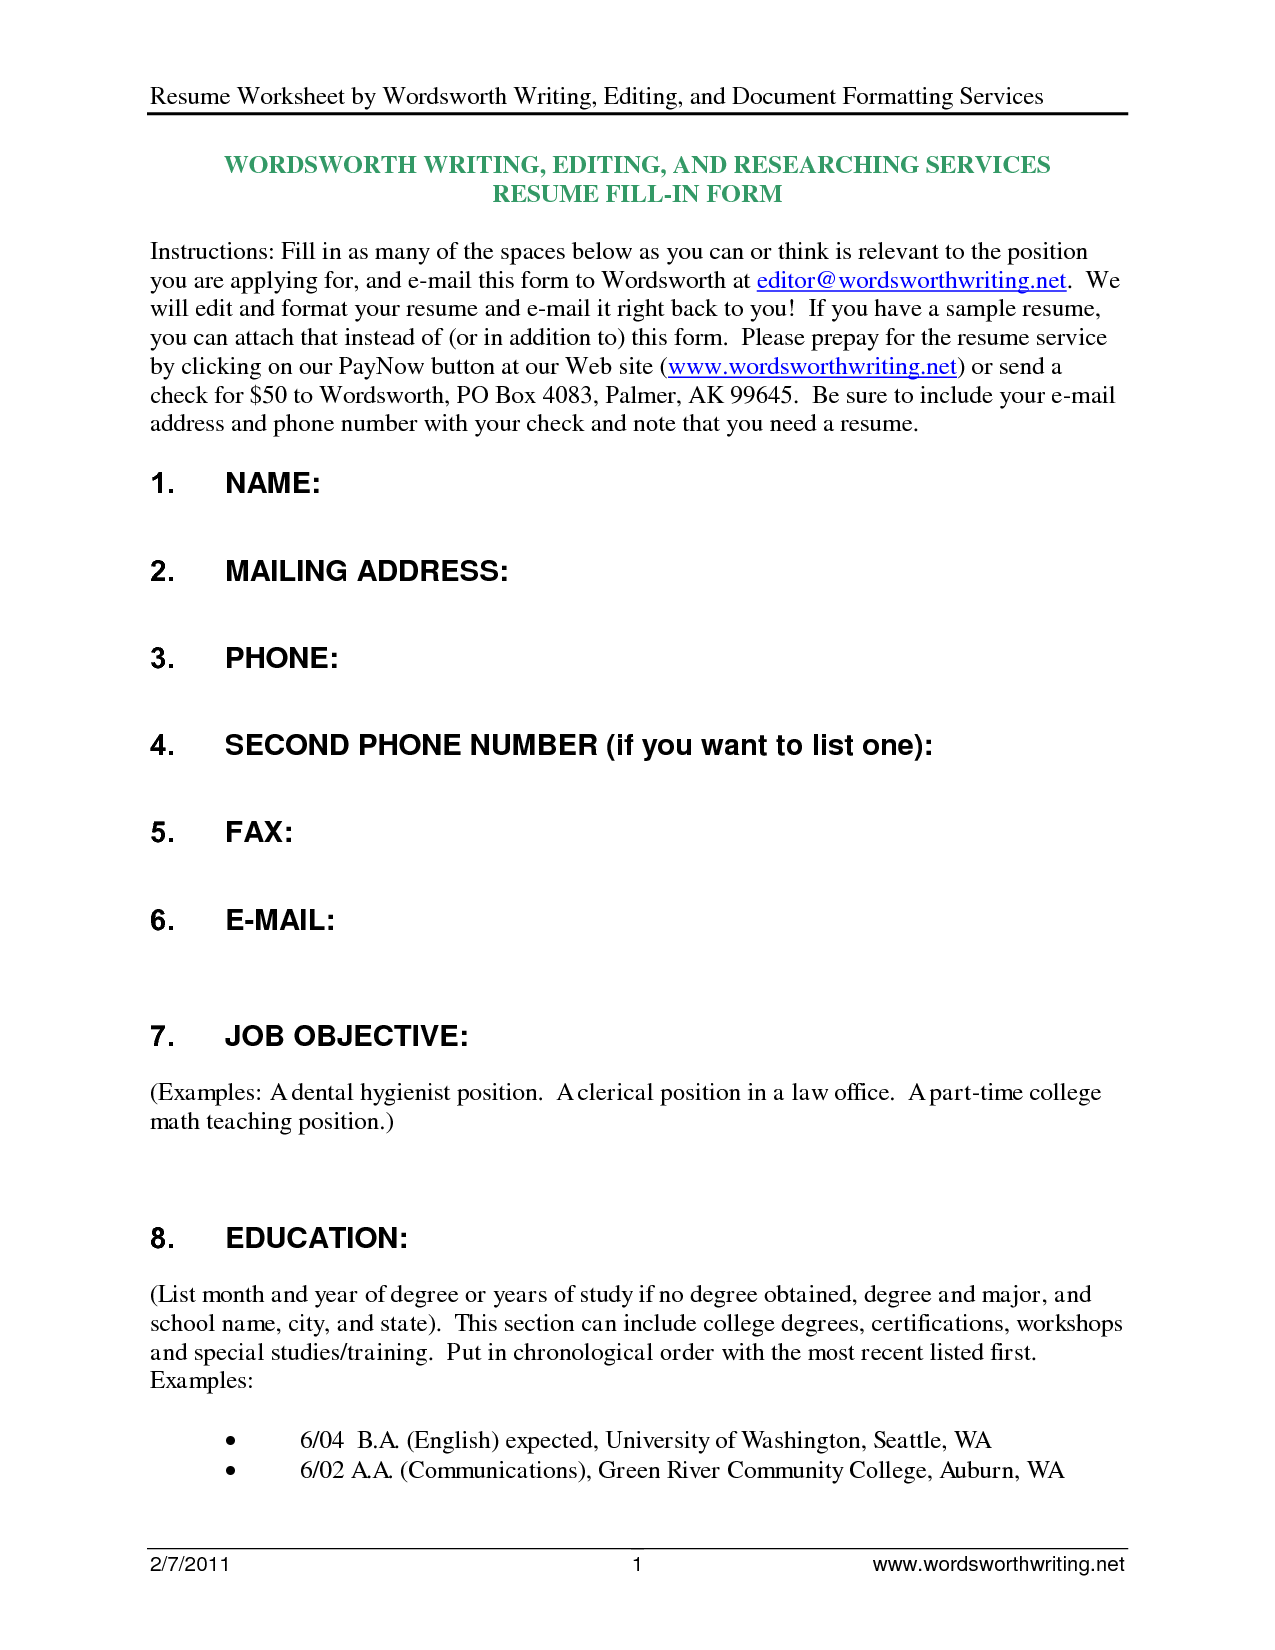 Free Fill in Resume Forms